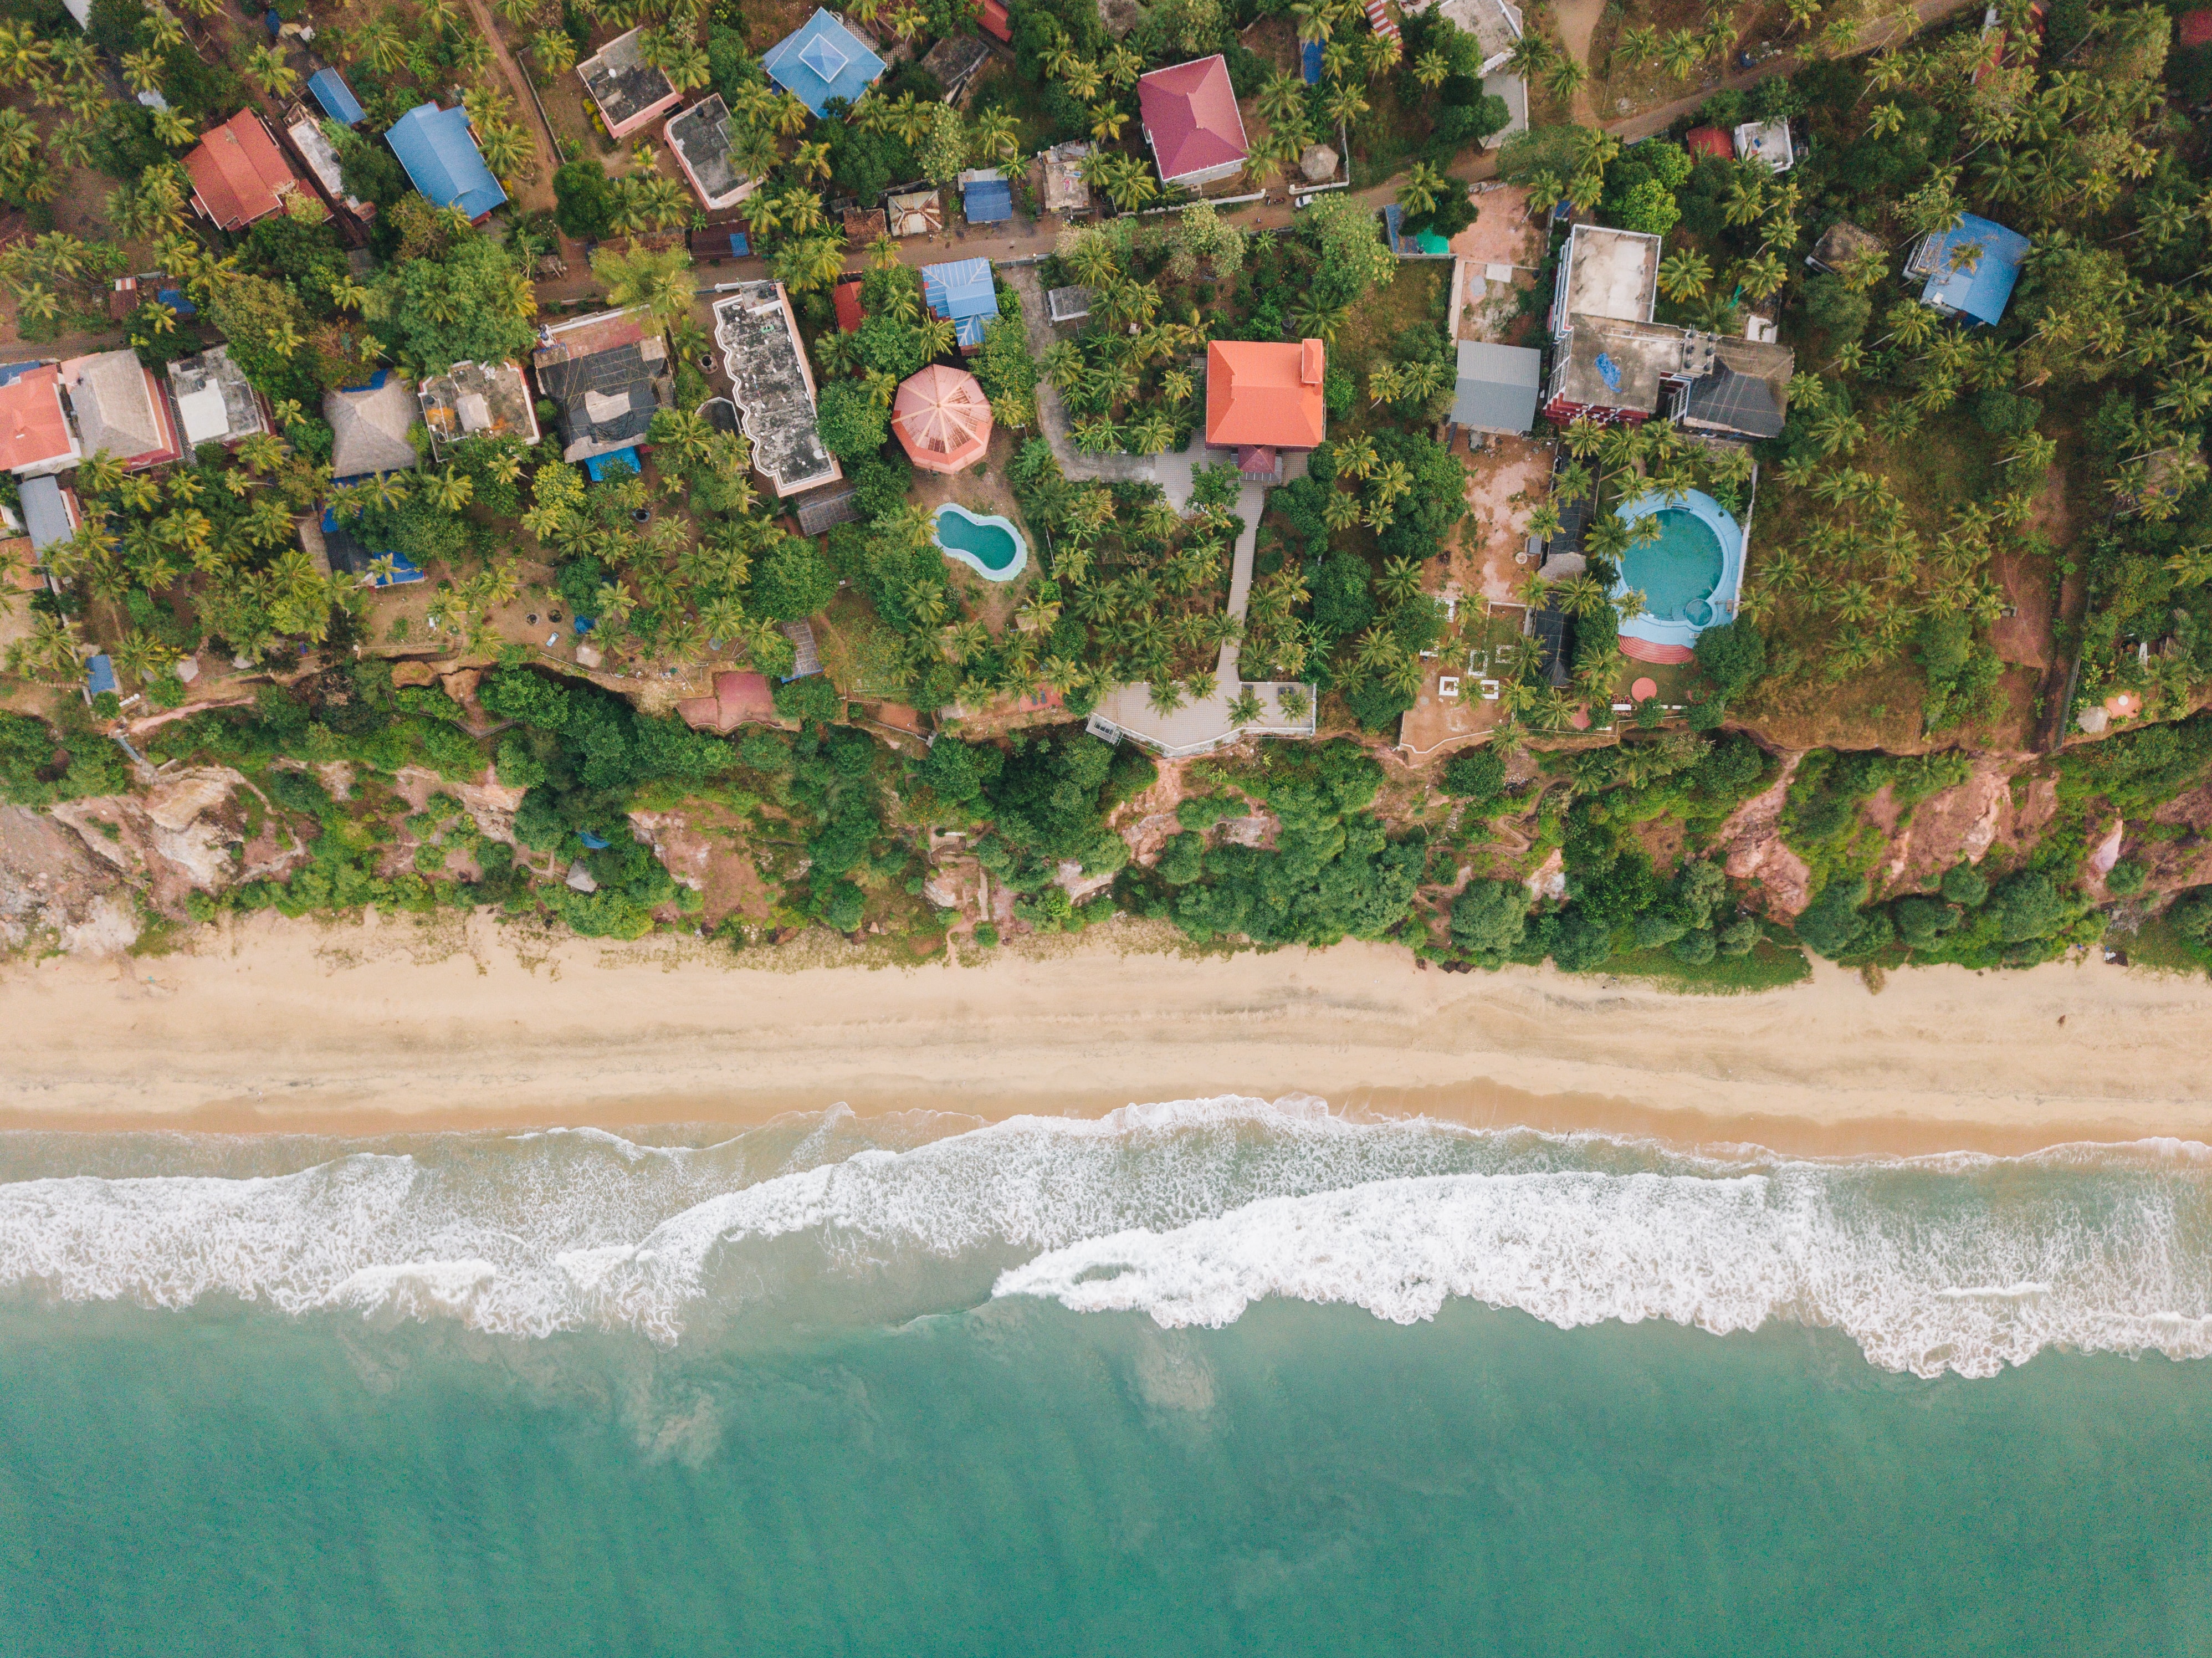 shore, view from above, nature, beach, palms, building, bank 8K